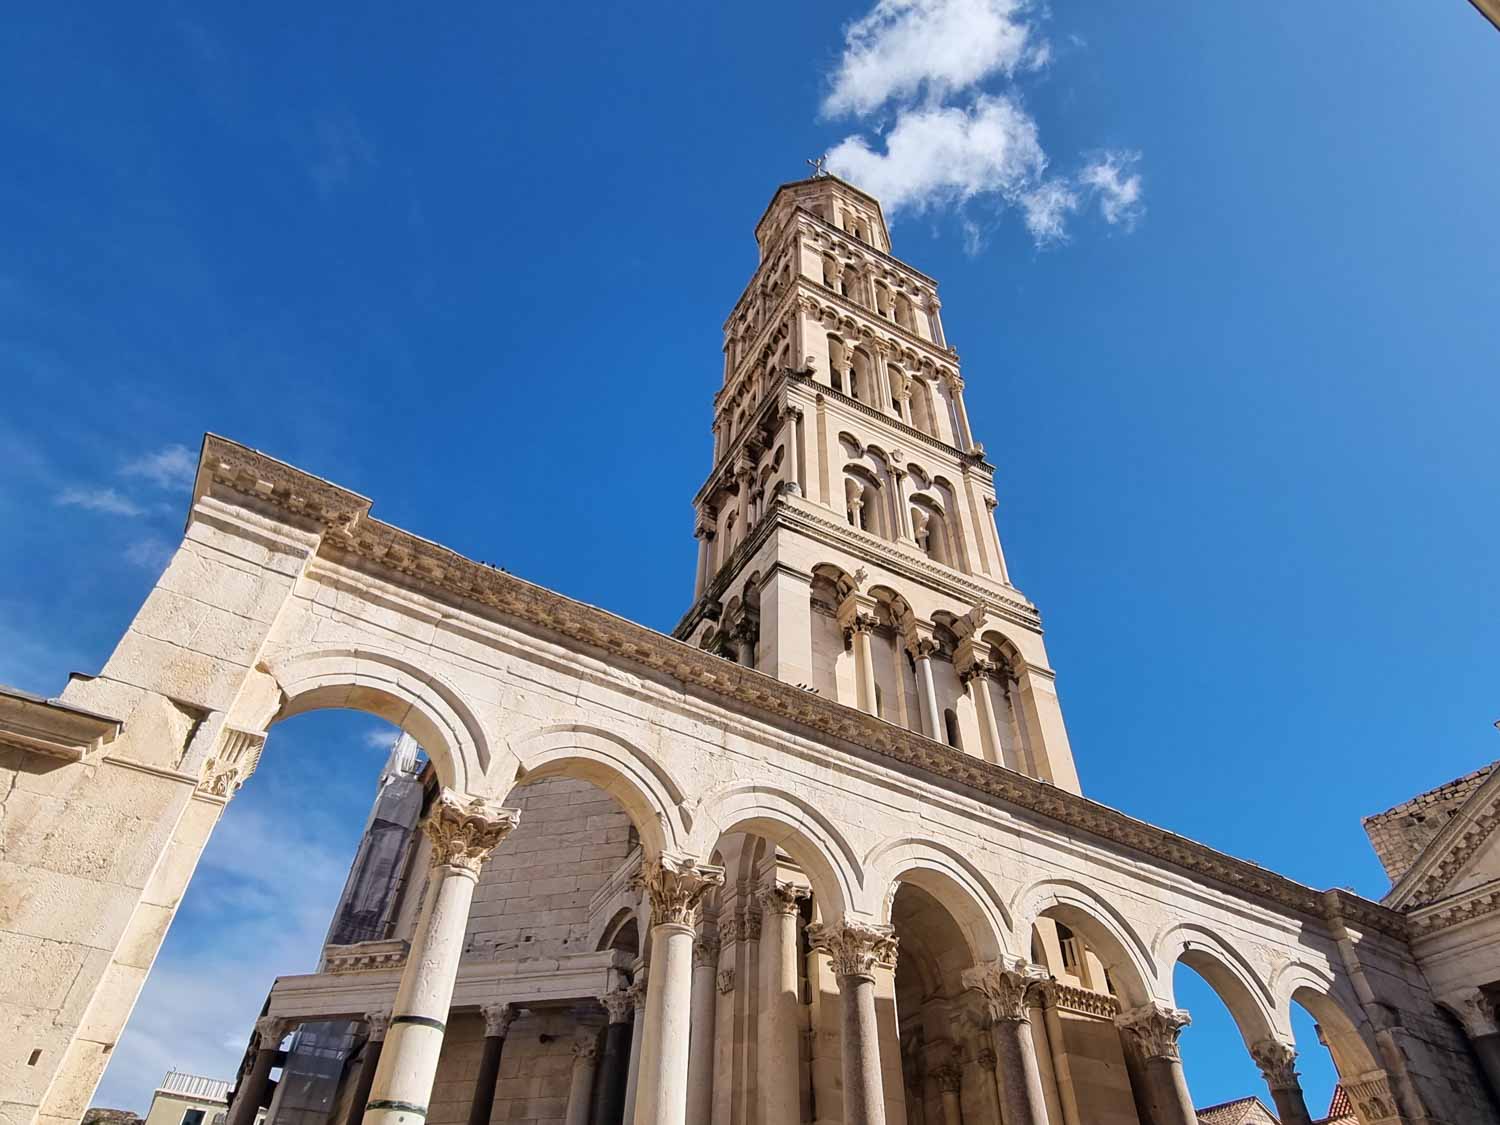 View of the arches and belltower of the cathedral of St Domnius in Split, formerly Diocletian's Mausoleum - one of the main things to see in Split with kids